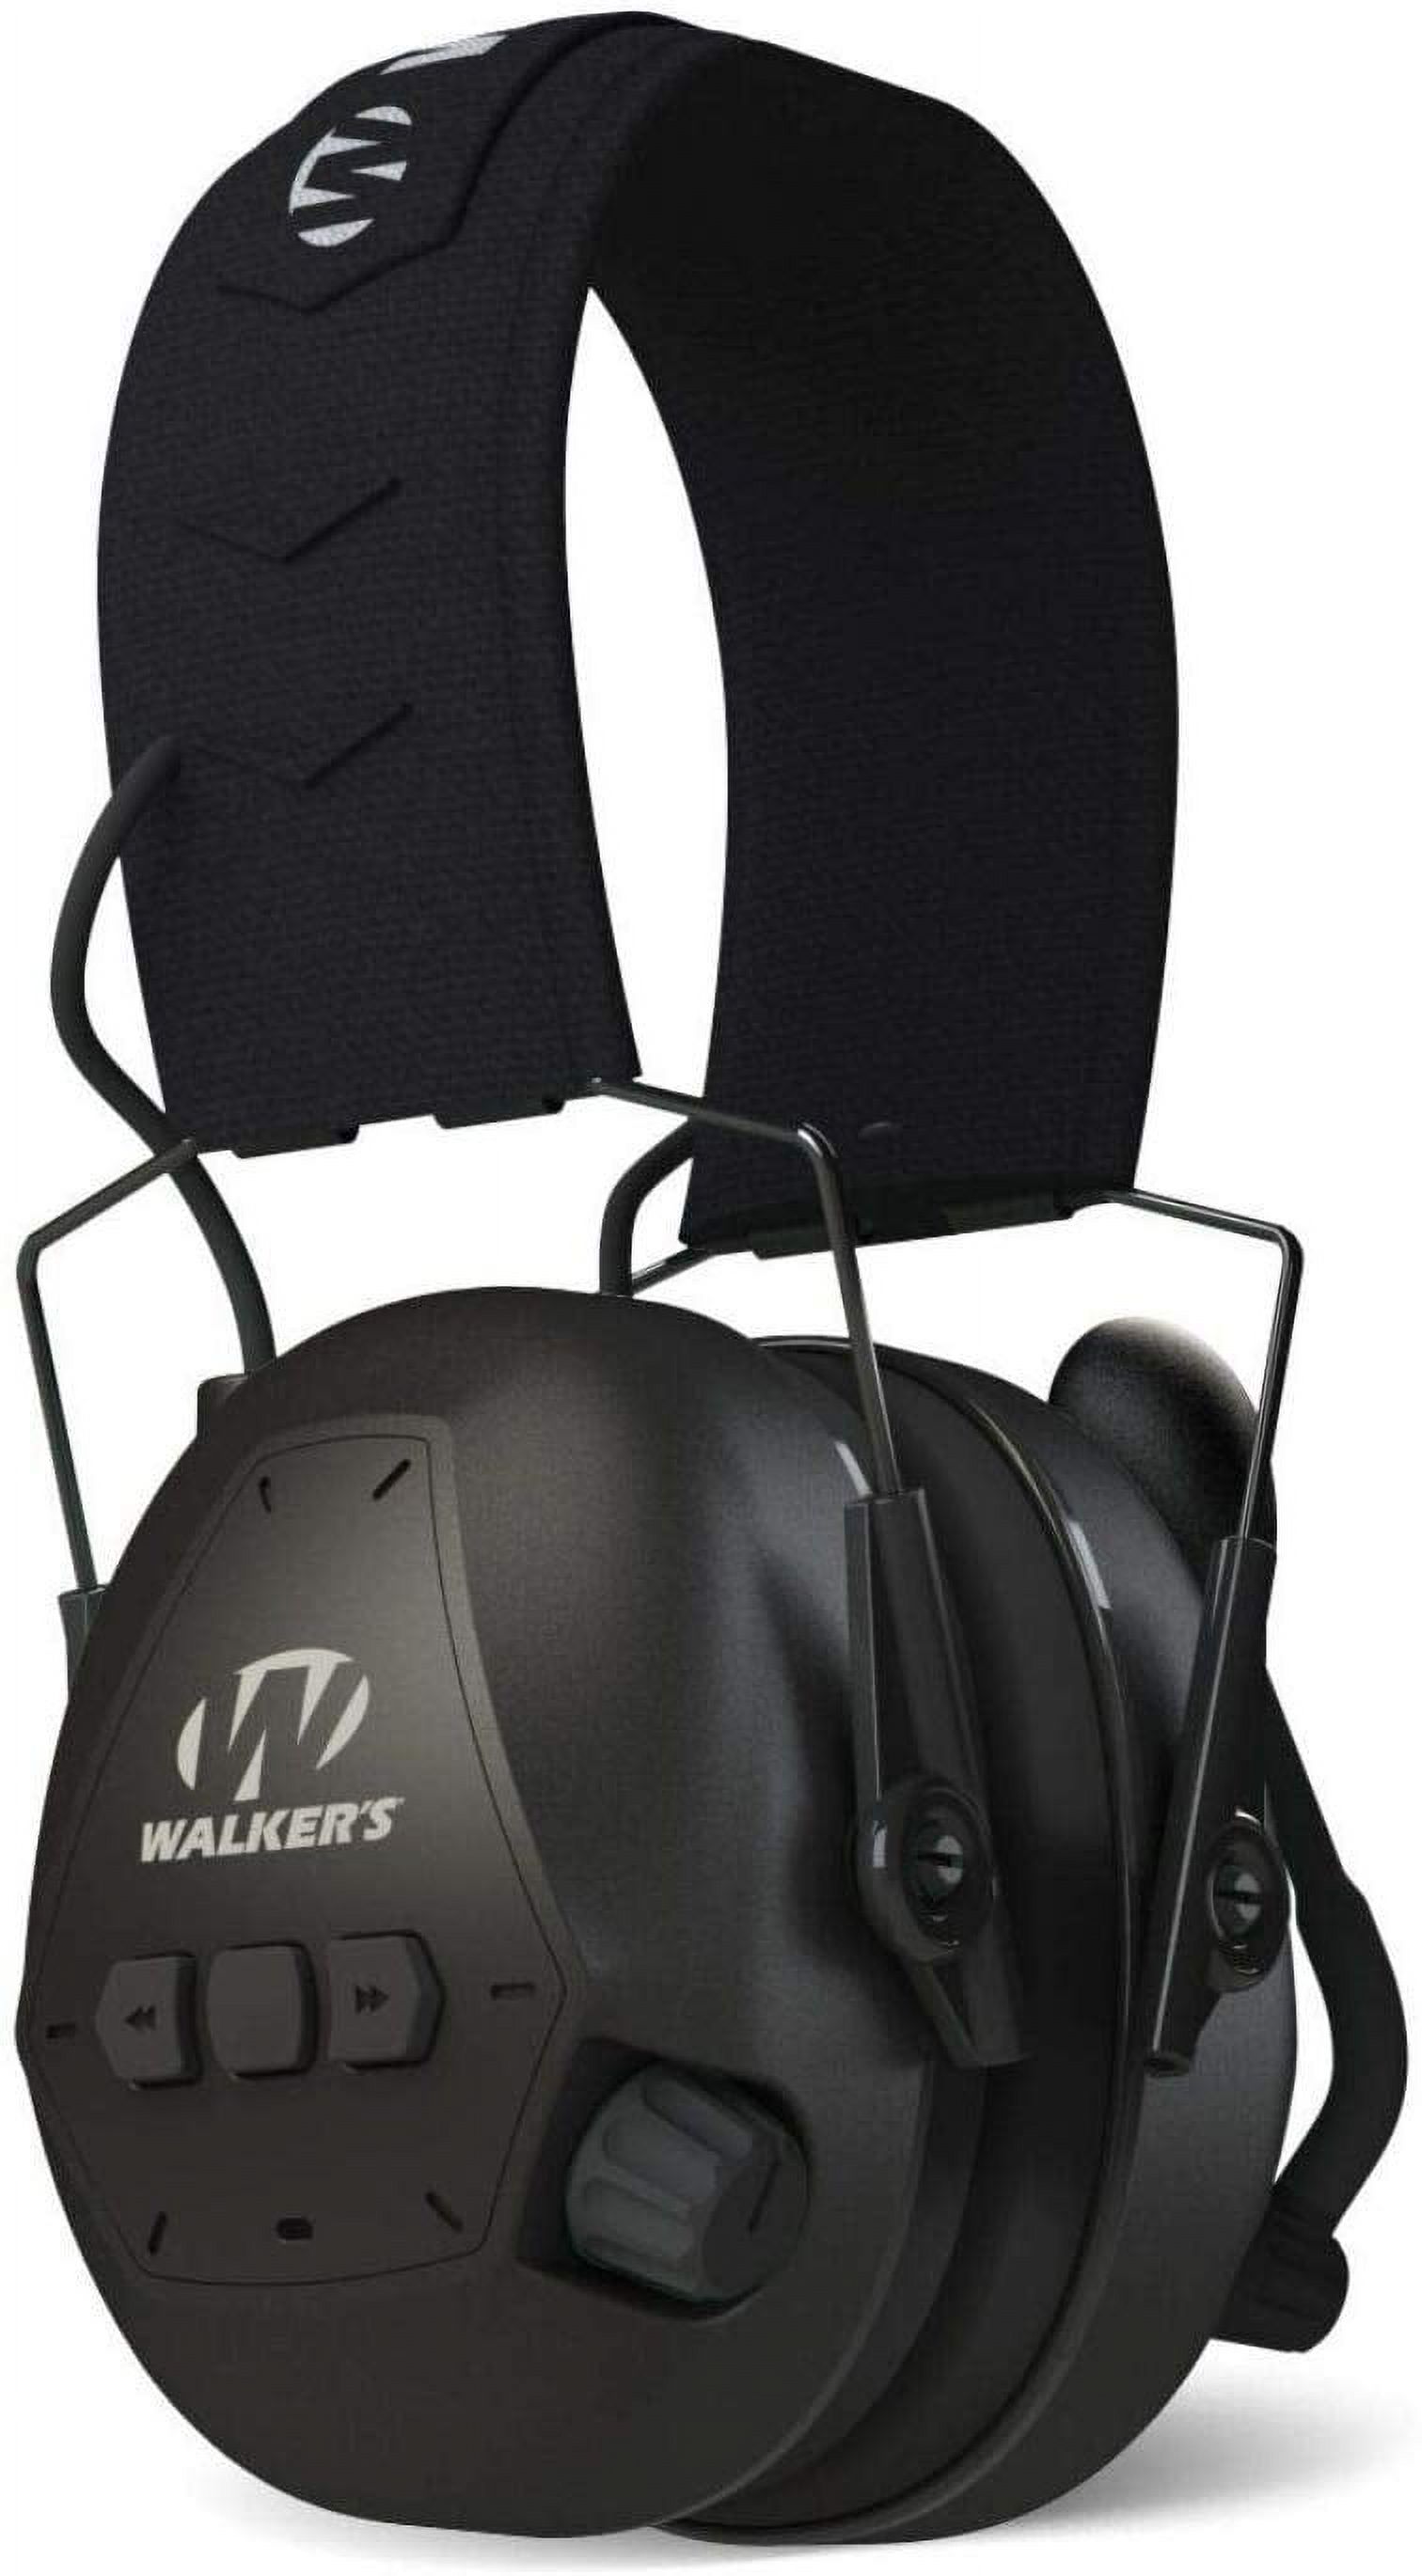 Walkers Bluetooth Passive Muff - image 2 of 2